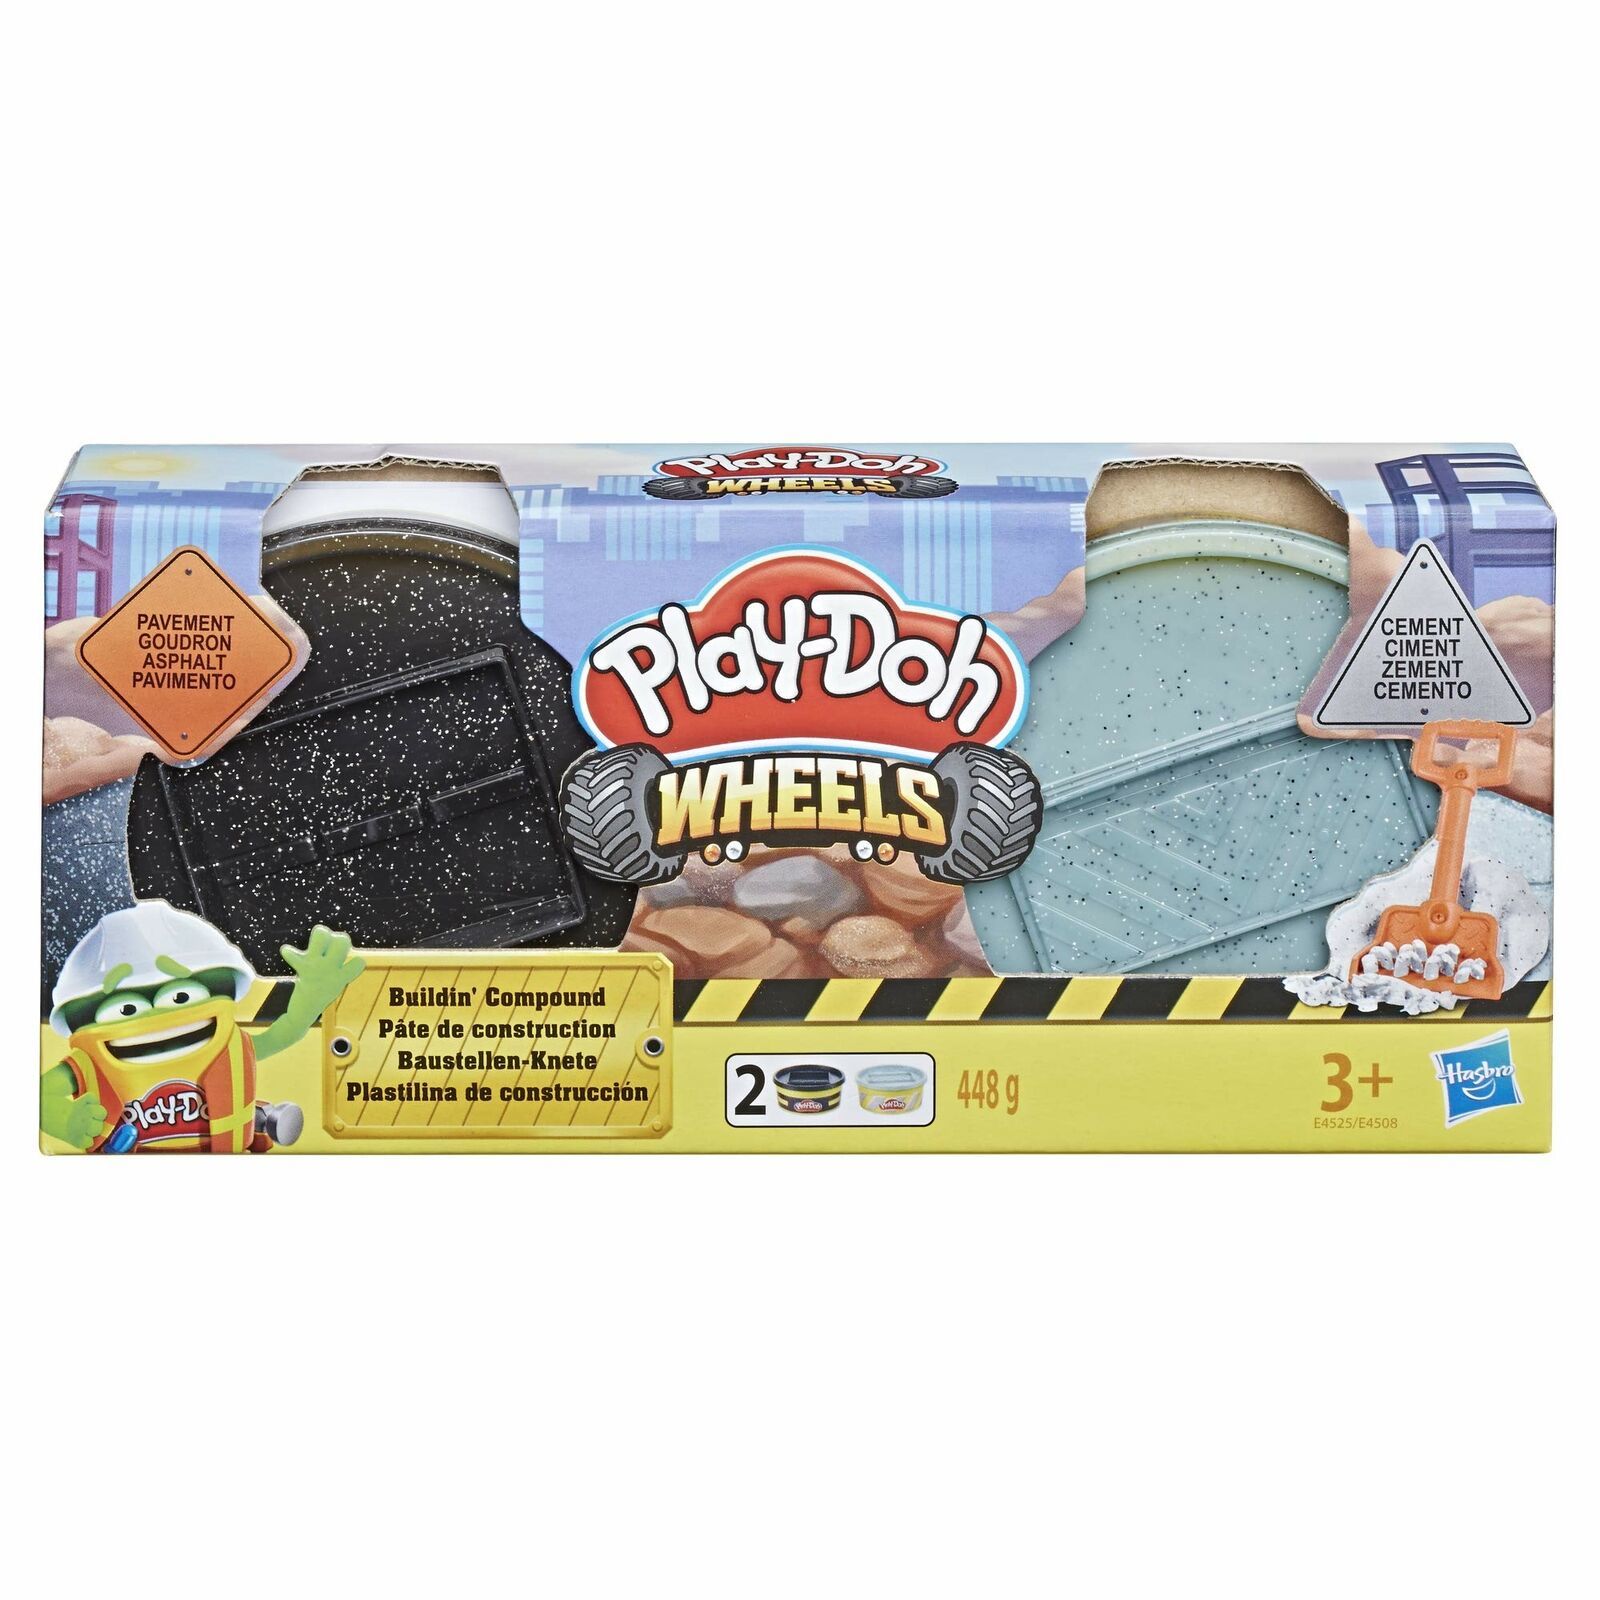 Play-Doh Wheels Cement & Pavement Buildin' Compound 2 Pack of 8 Oz Cans